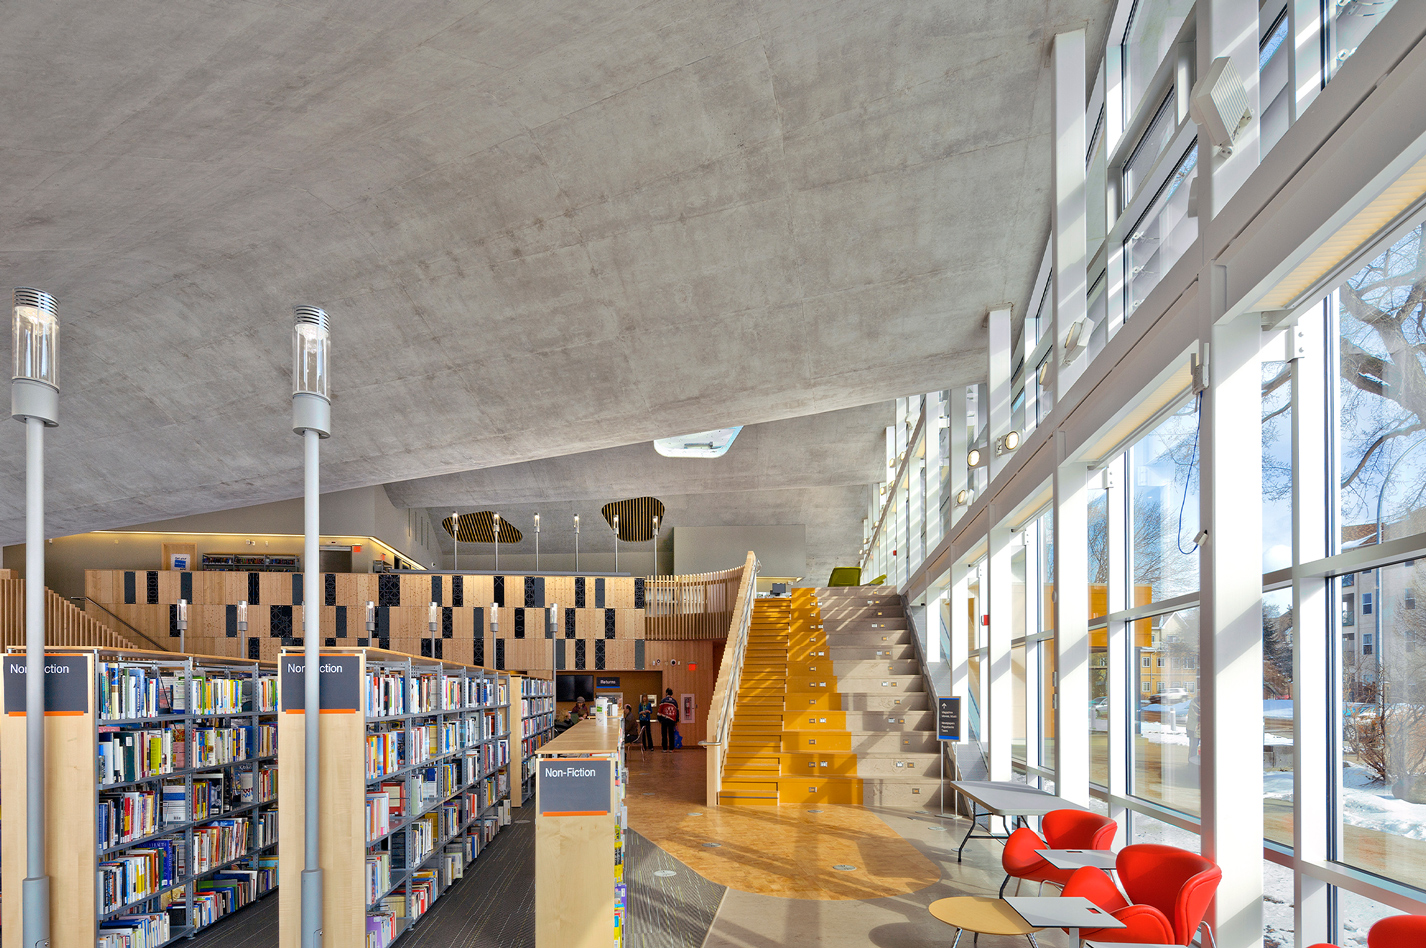 Interior view of library shelves, a staircase and floor-to-ceiling walls